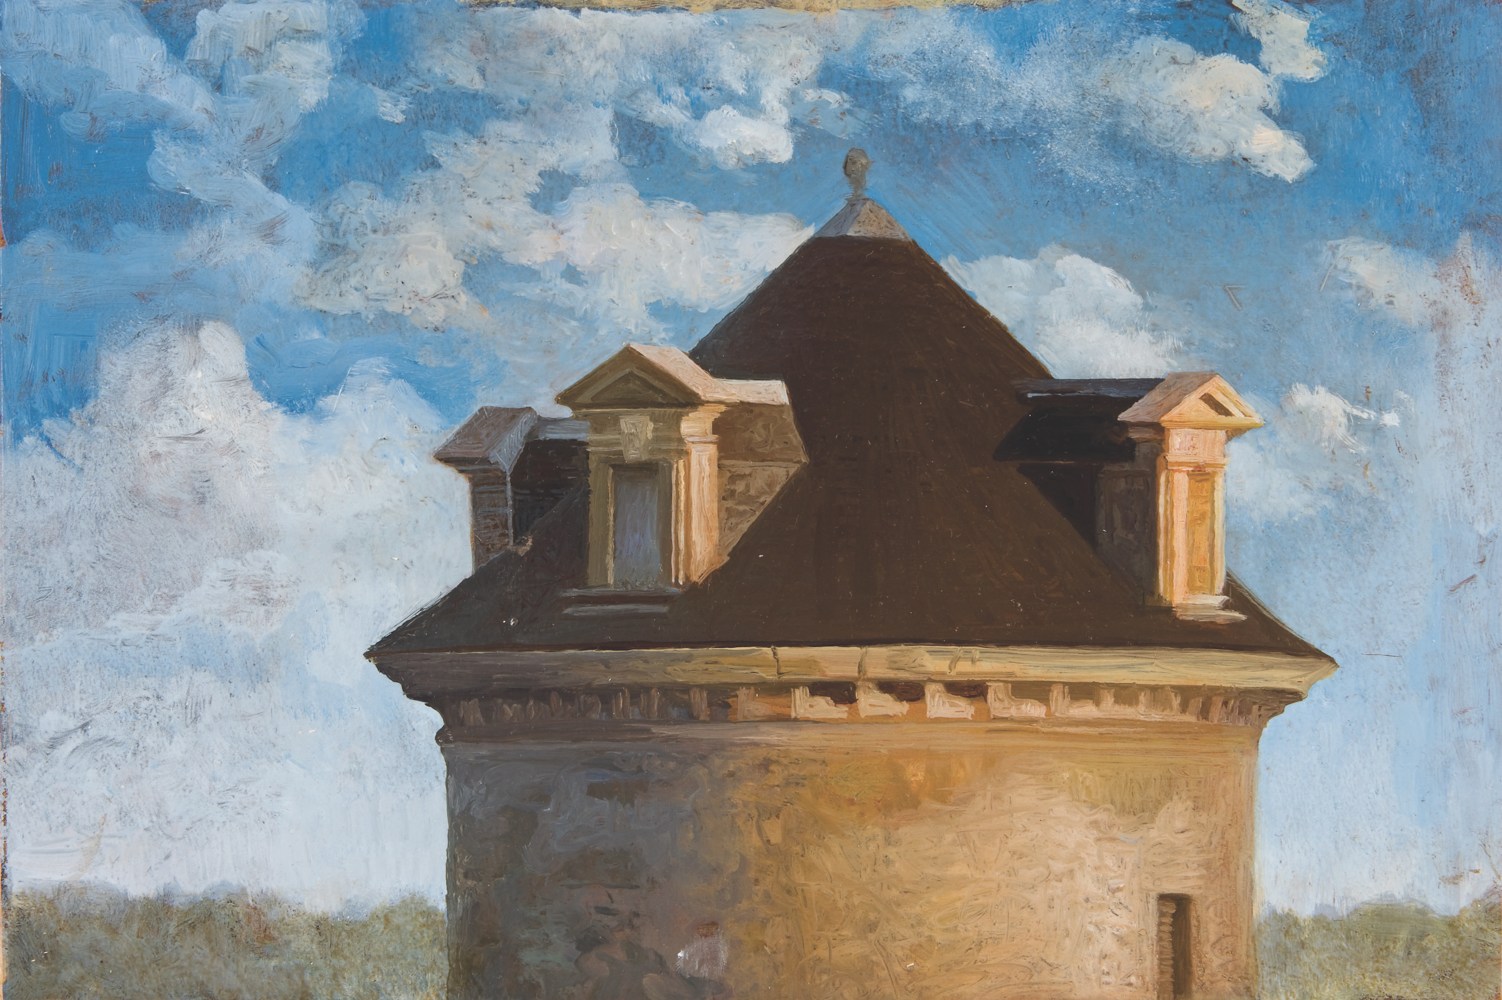 Dove Cote, 2009

oil on paper mounted on panel

7 3/4 x 11 5/8 in. / 19.7 x 29.5 cm